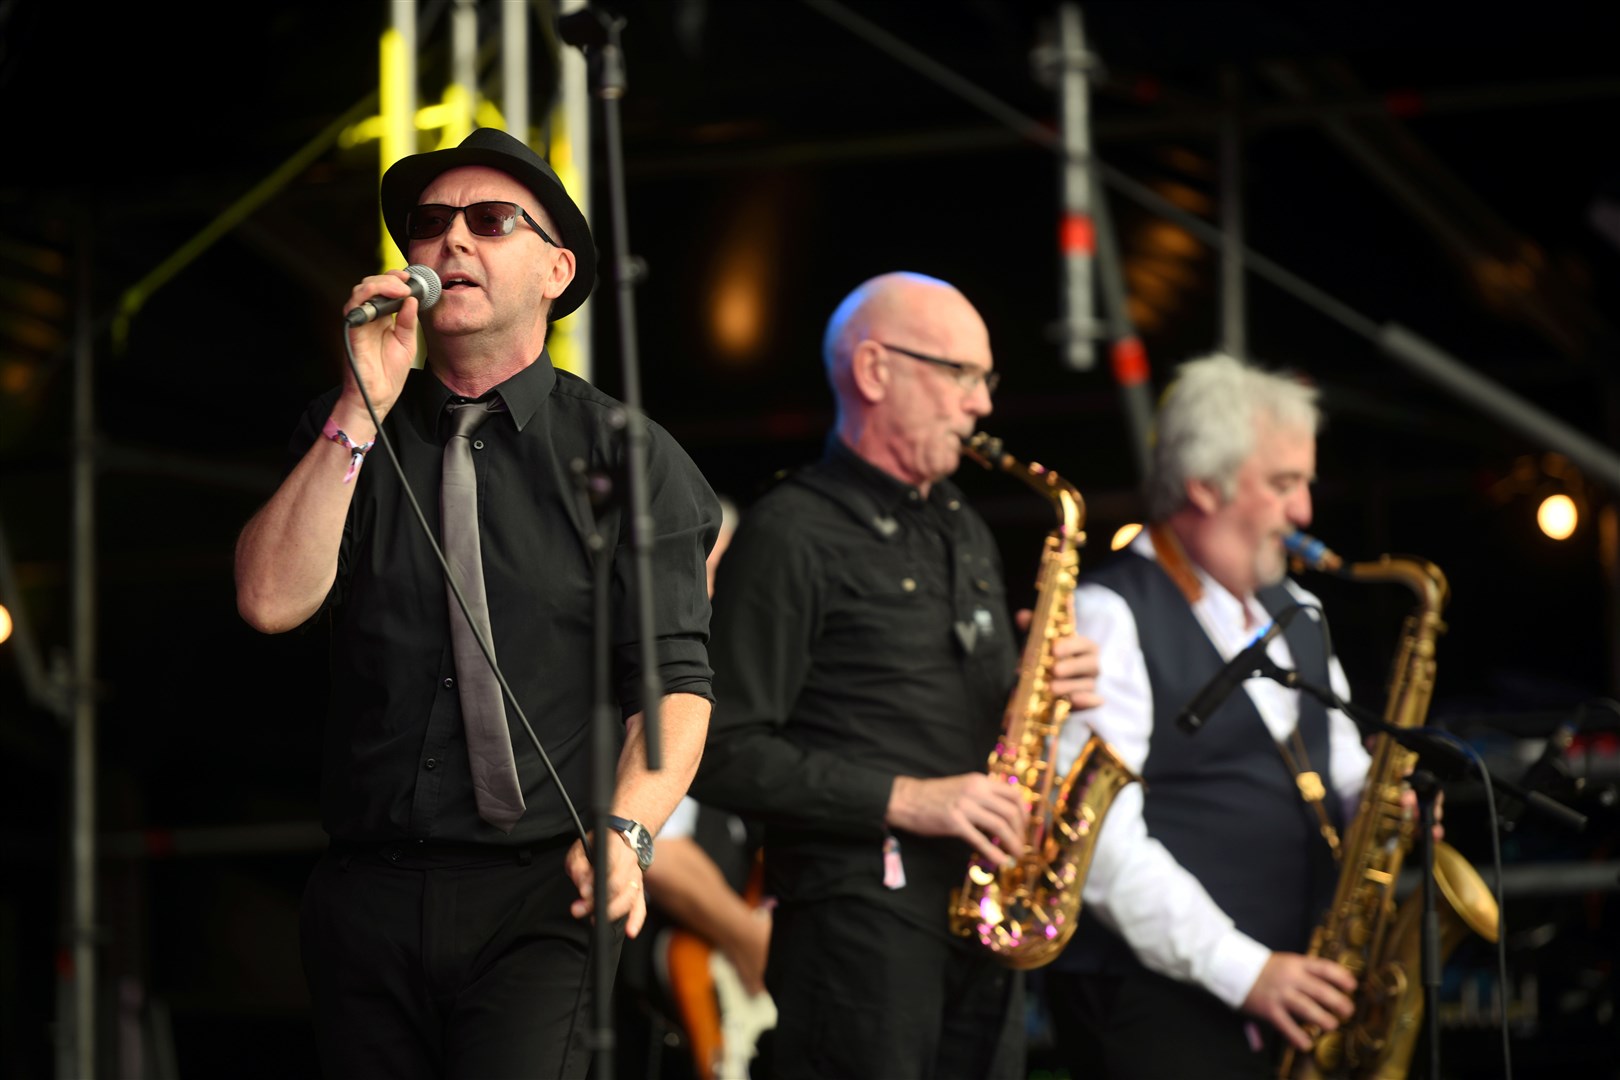 Scooty & The Skyhooks on stage at Belladrum. Picture: James Mackenzie.